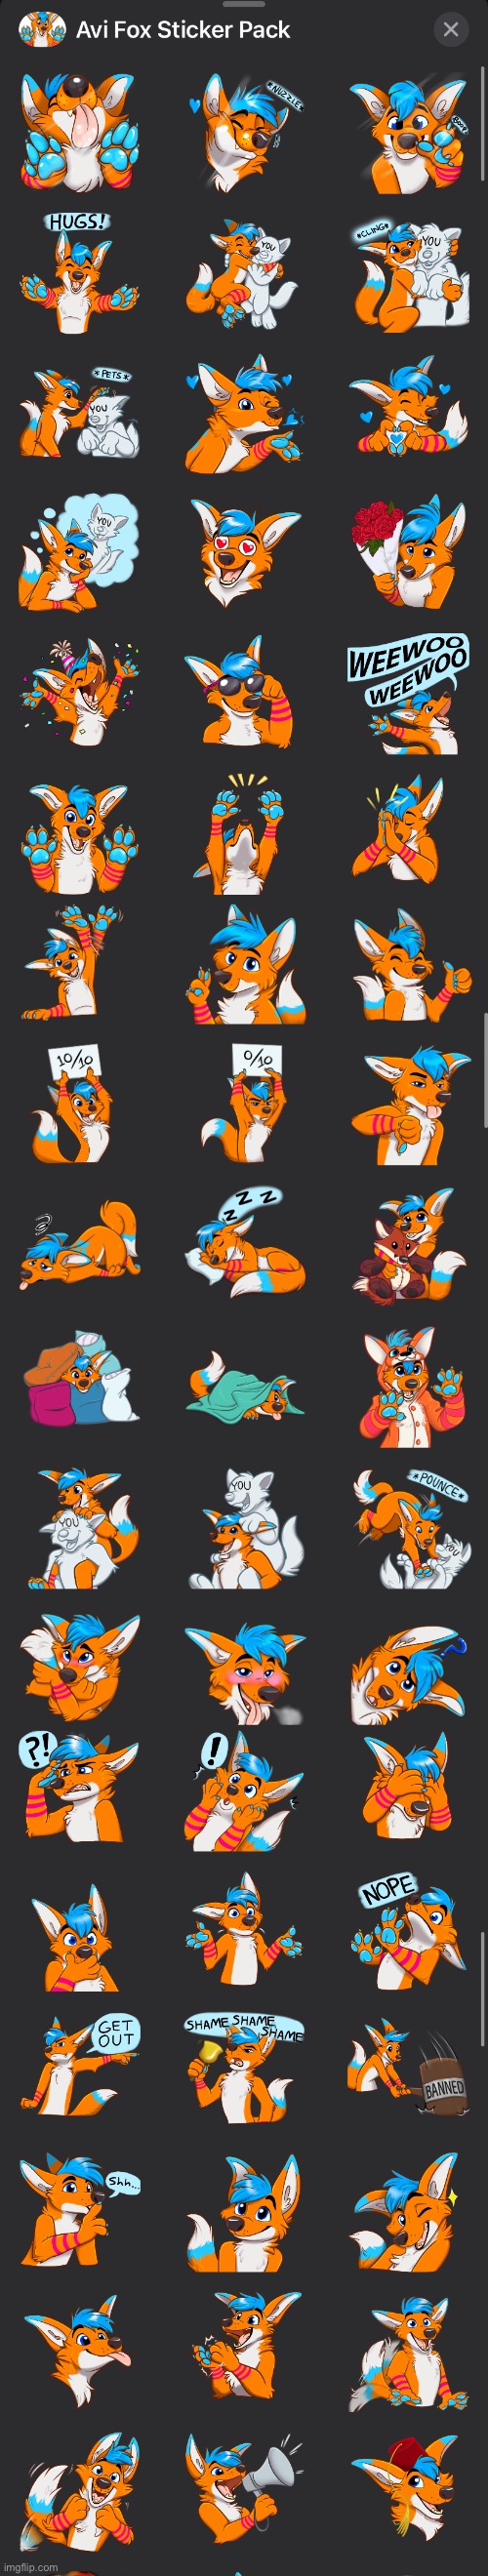 Here’s like the top half of the pack- I’m pretty sure it’s like 5 bucks. So- it’s a lot. There’s at least 100 stickers total. | image tagged in avifox,dope asf | made w/ Imgflip meme maker